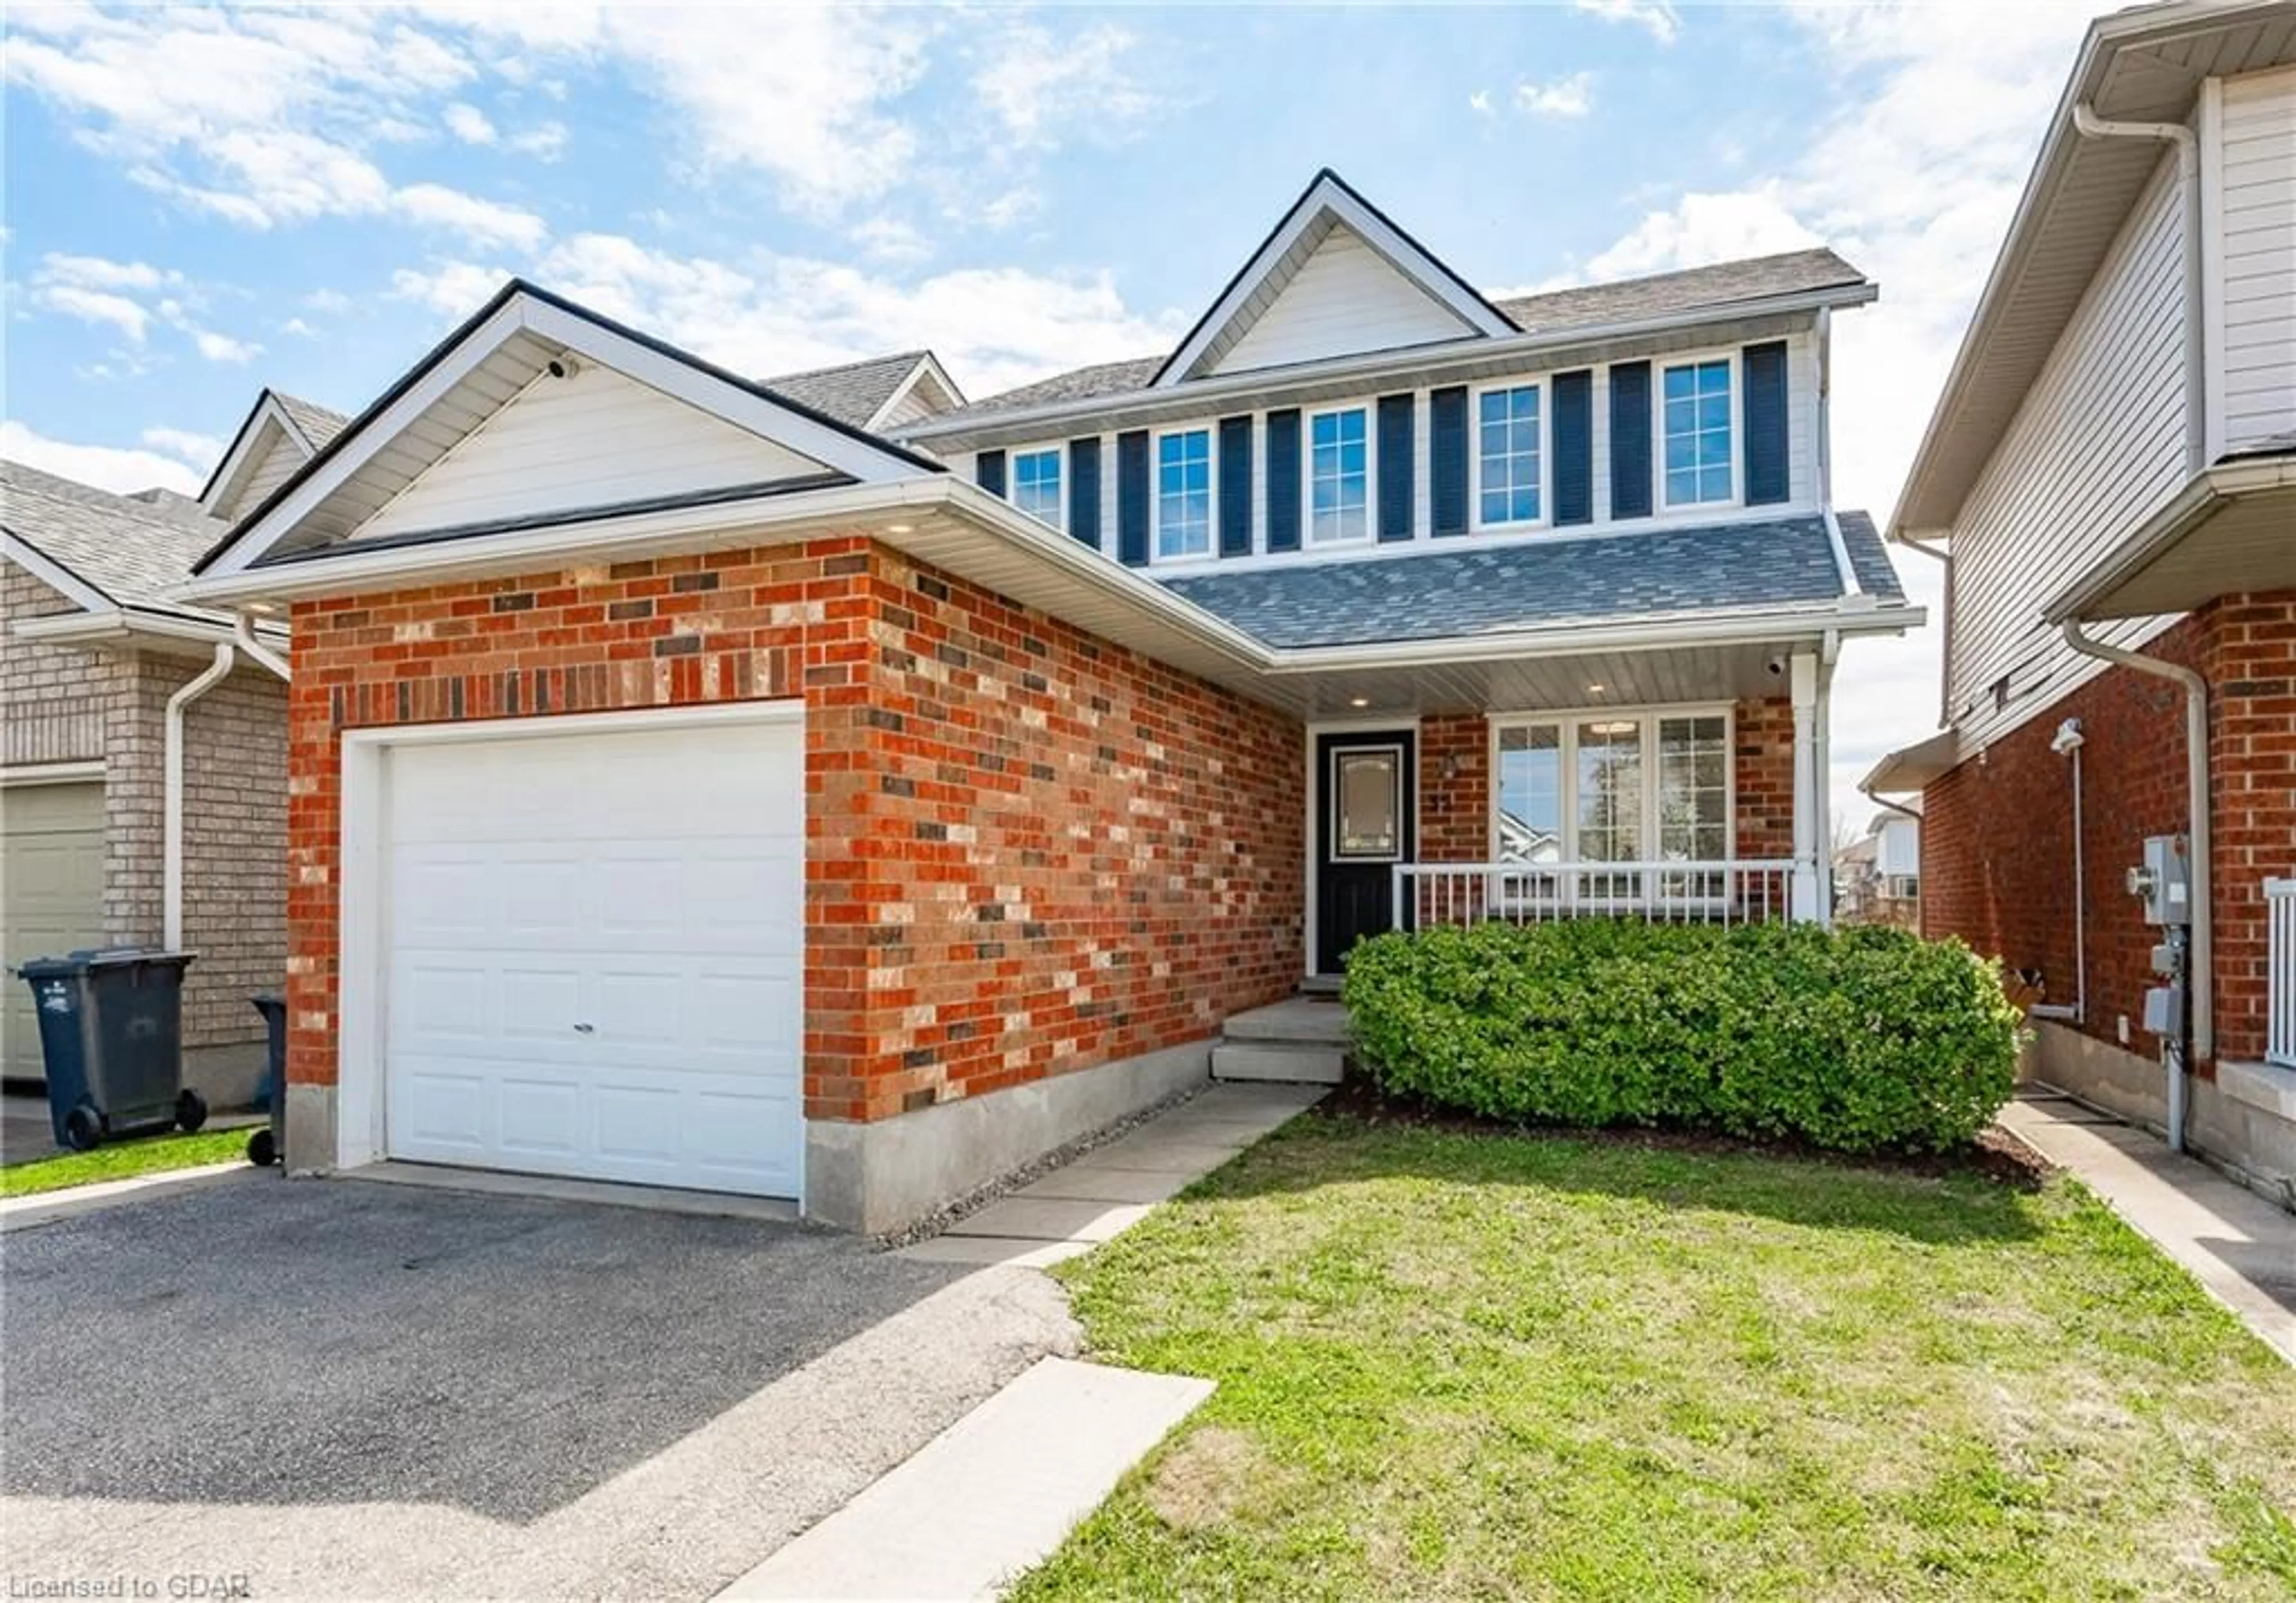 Home with brick exterior material for 35 Drohan Dr, Guelph Ontario N1G 5J8